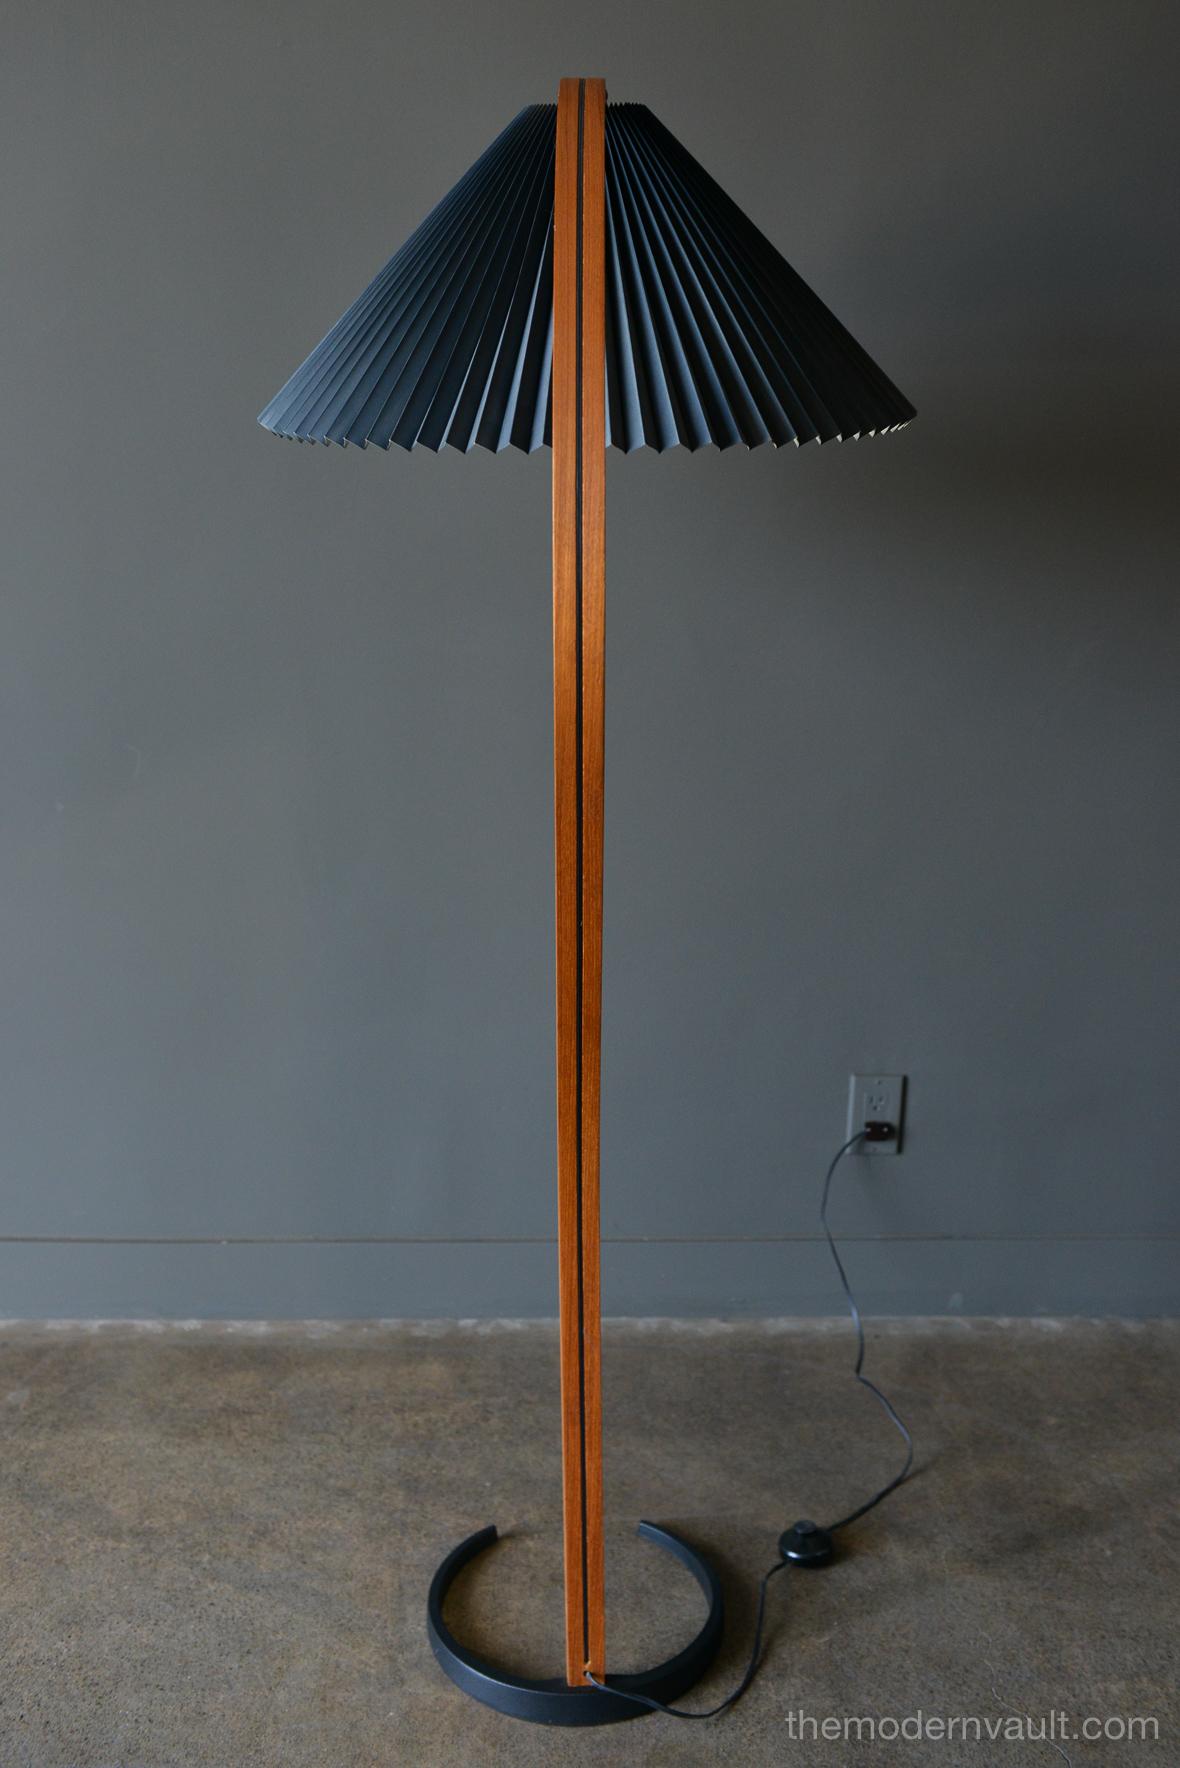 Danish bentwood floor lamp by Mads Caprani lamp, circa 1970. Original condition with black shade. Beautiful bentwood frame with pleated black shade. Original floor switch and cast iron base. Measures 60